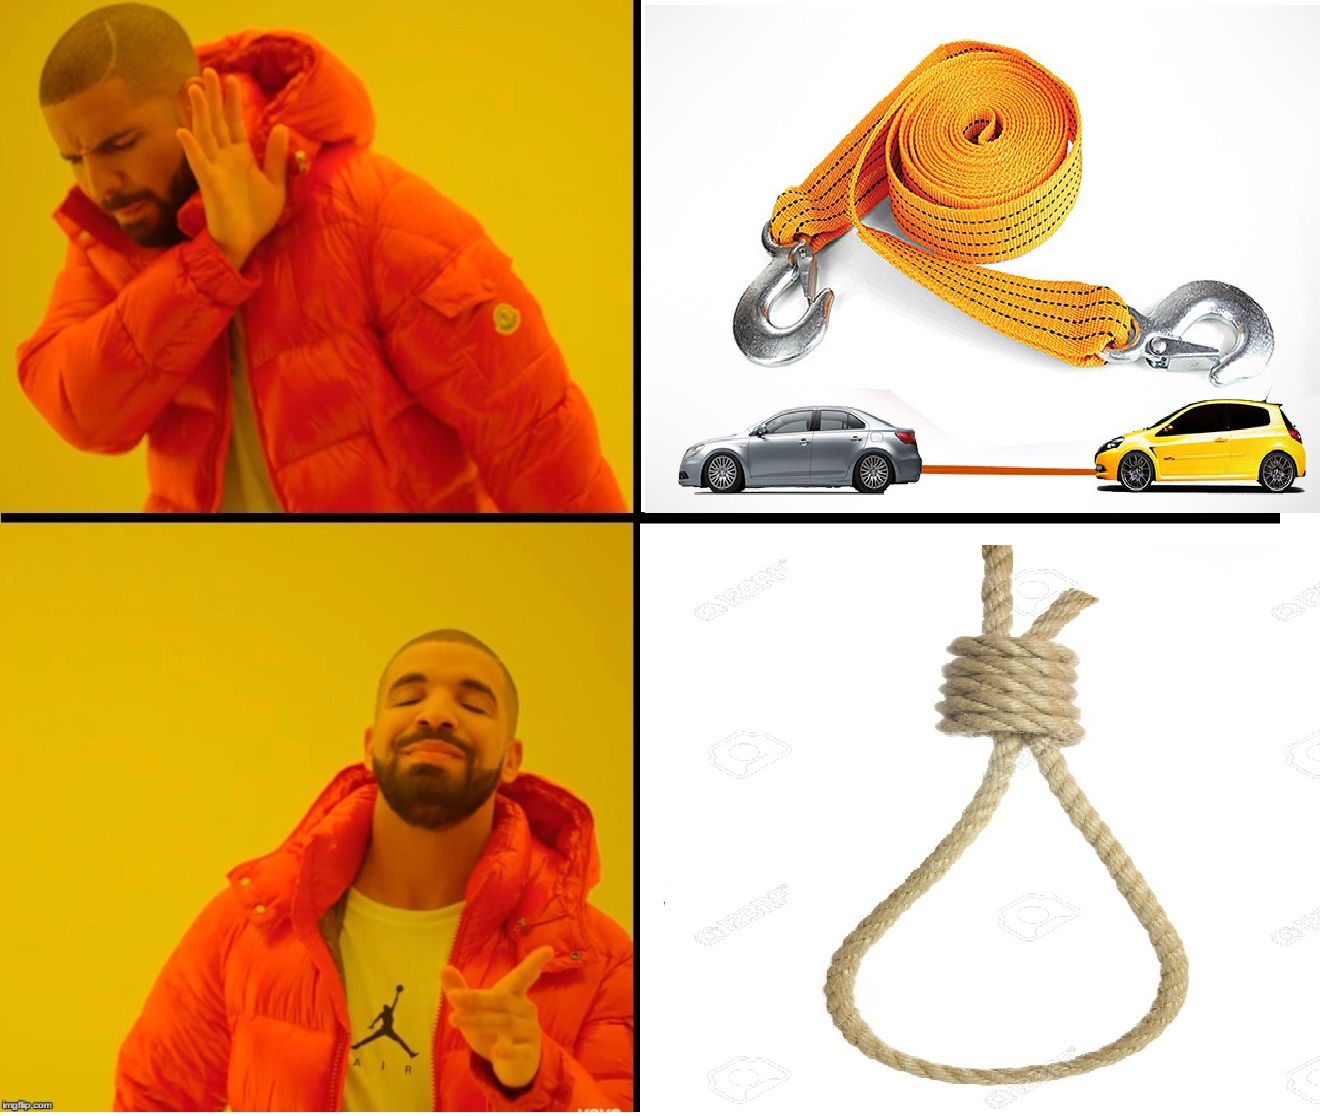 When you're broke, use the rope